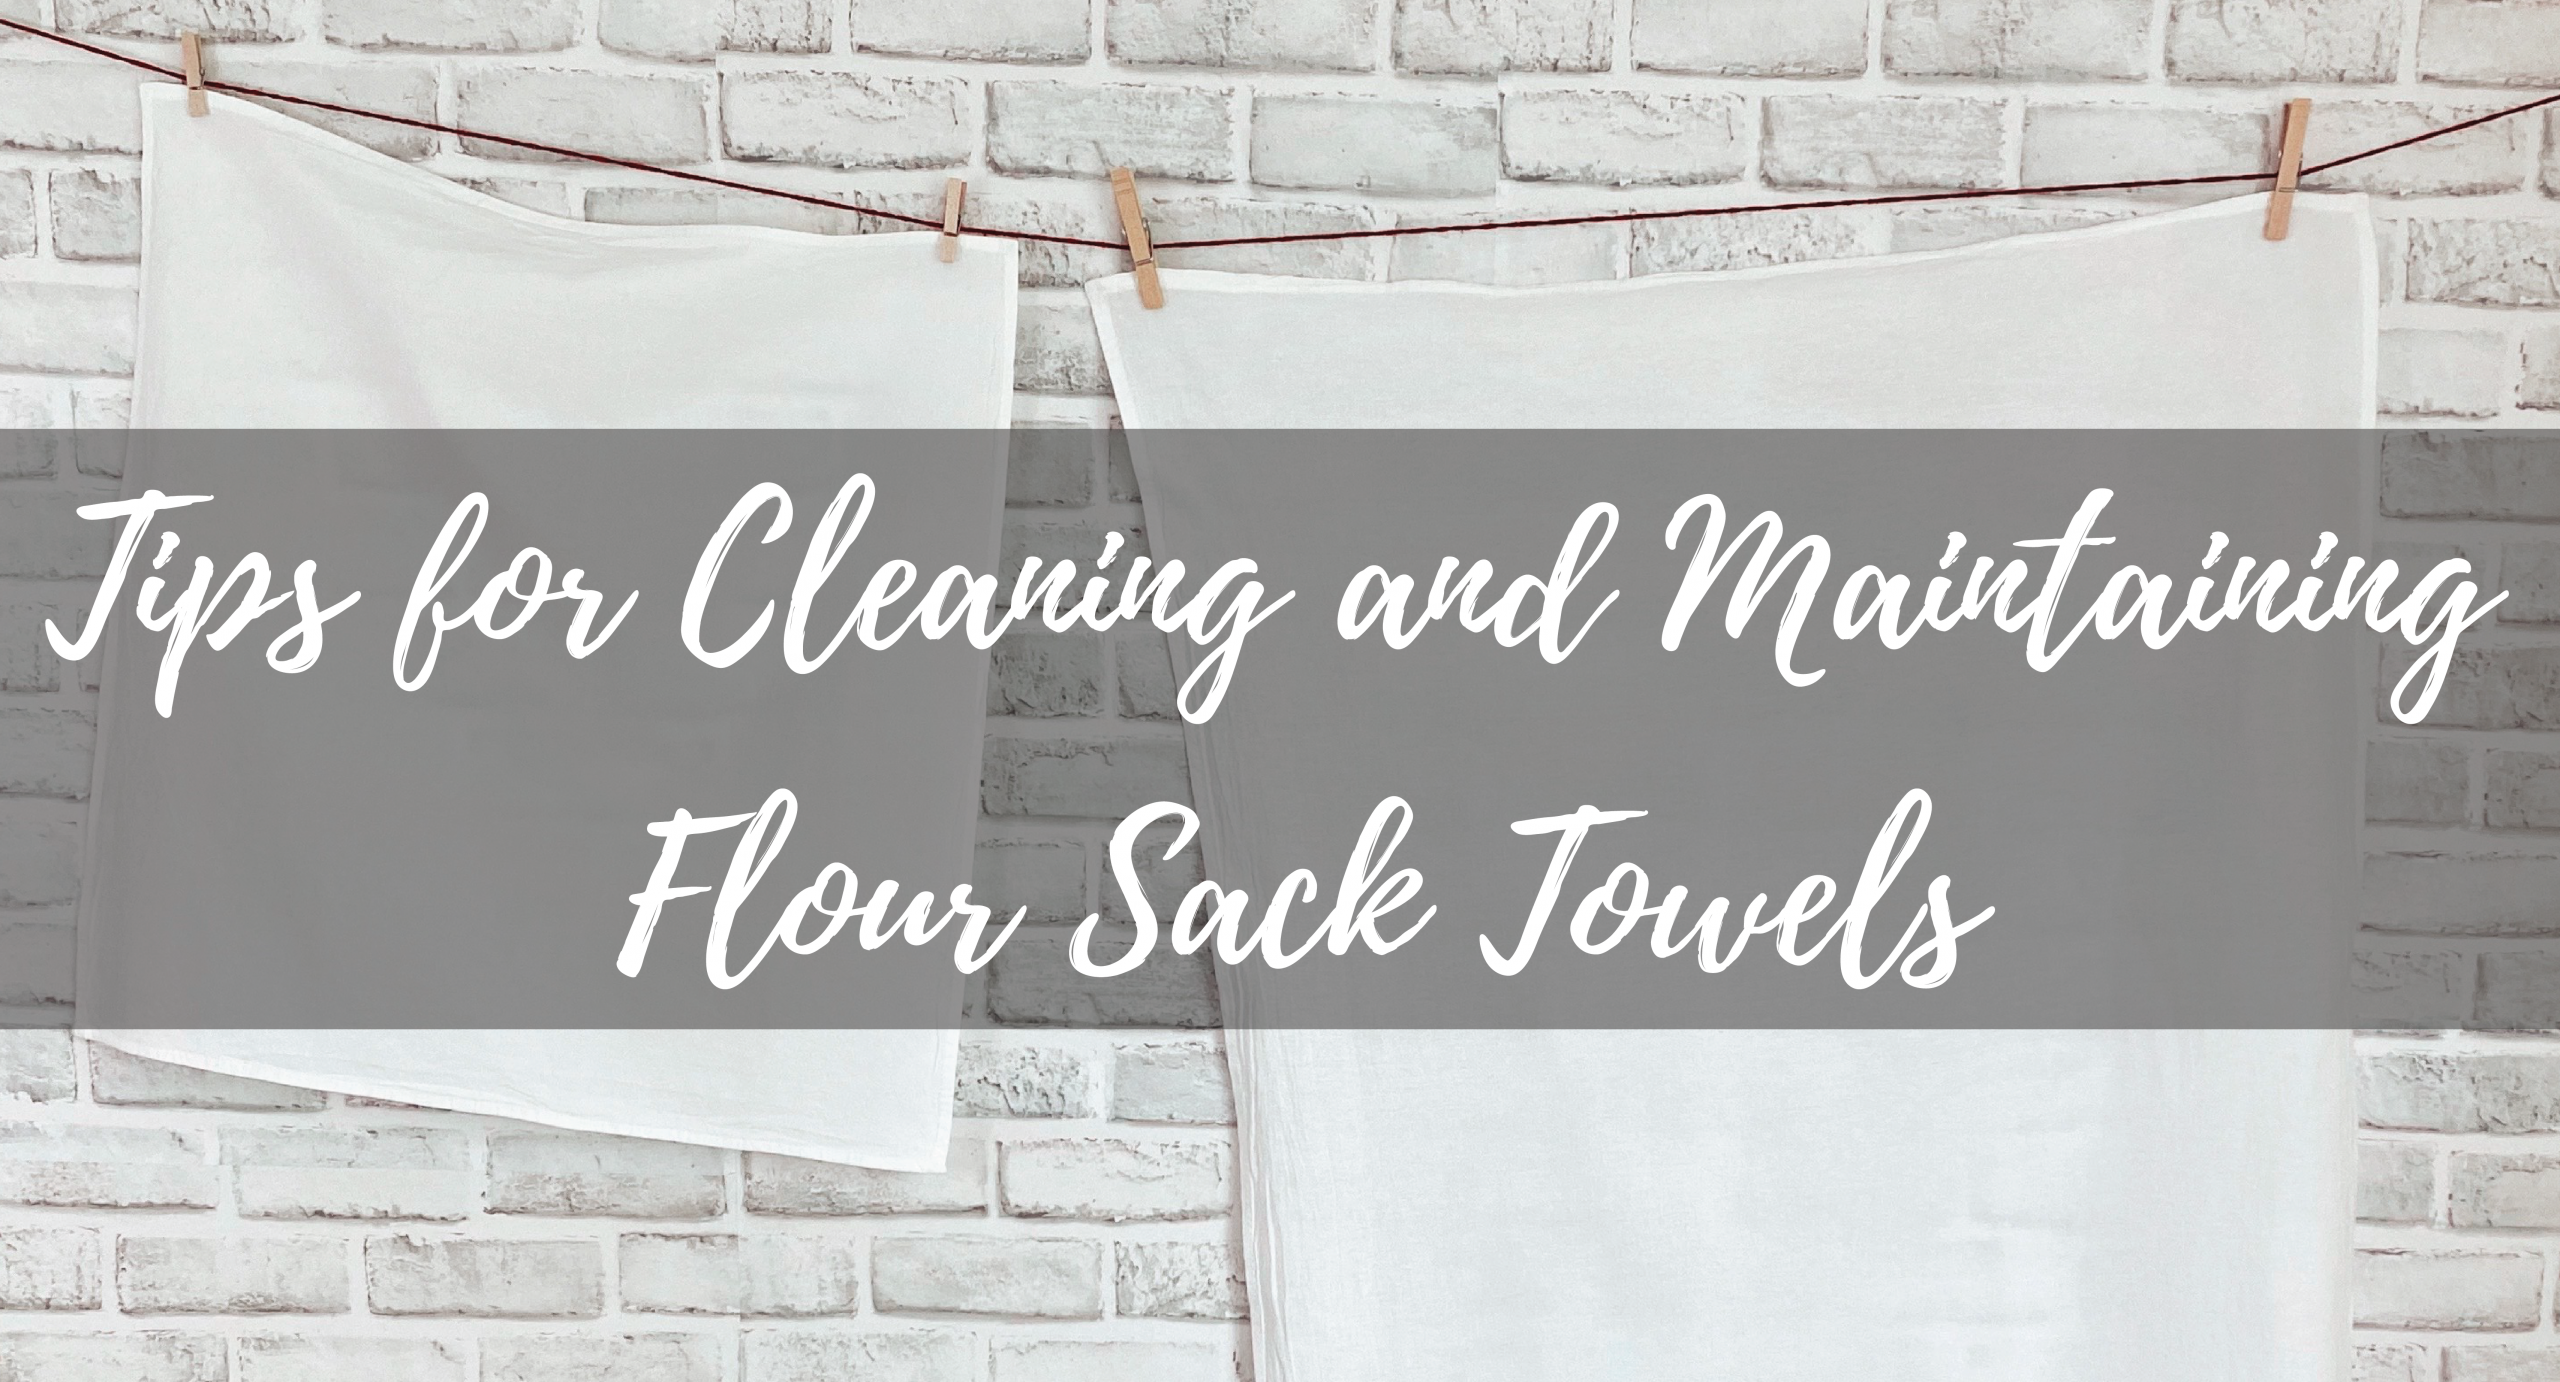 How to Fold Towels - Clean Mama